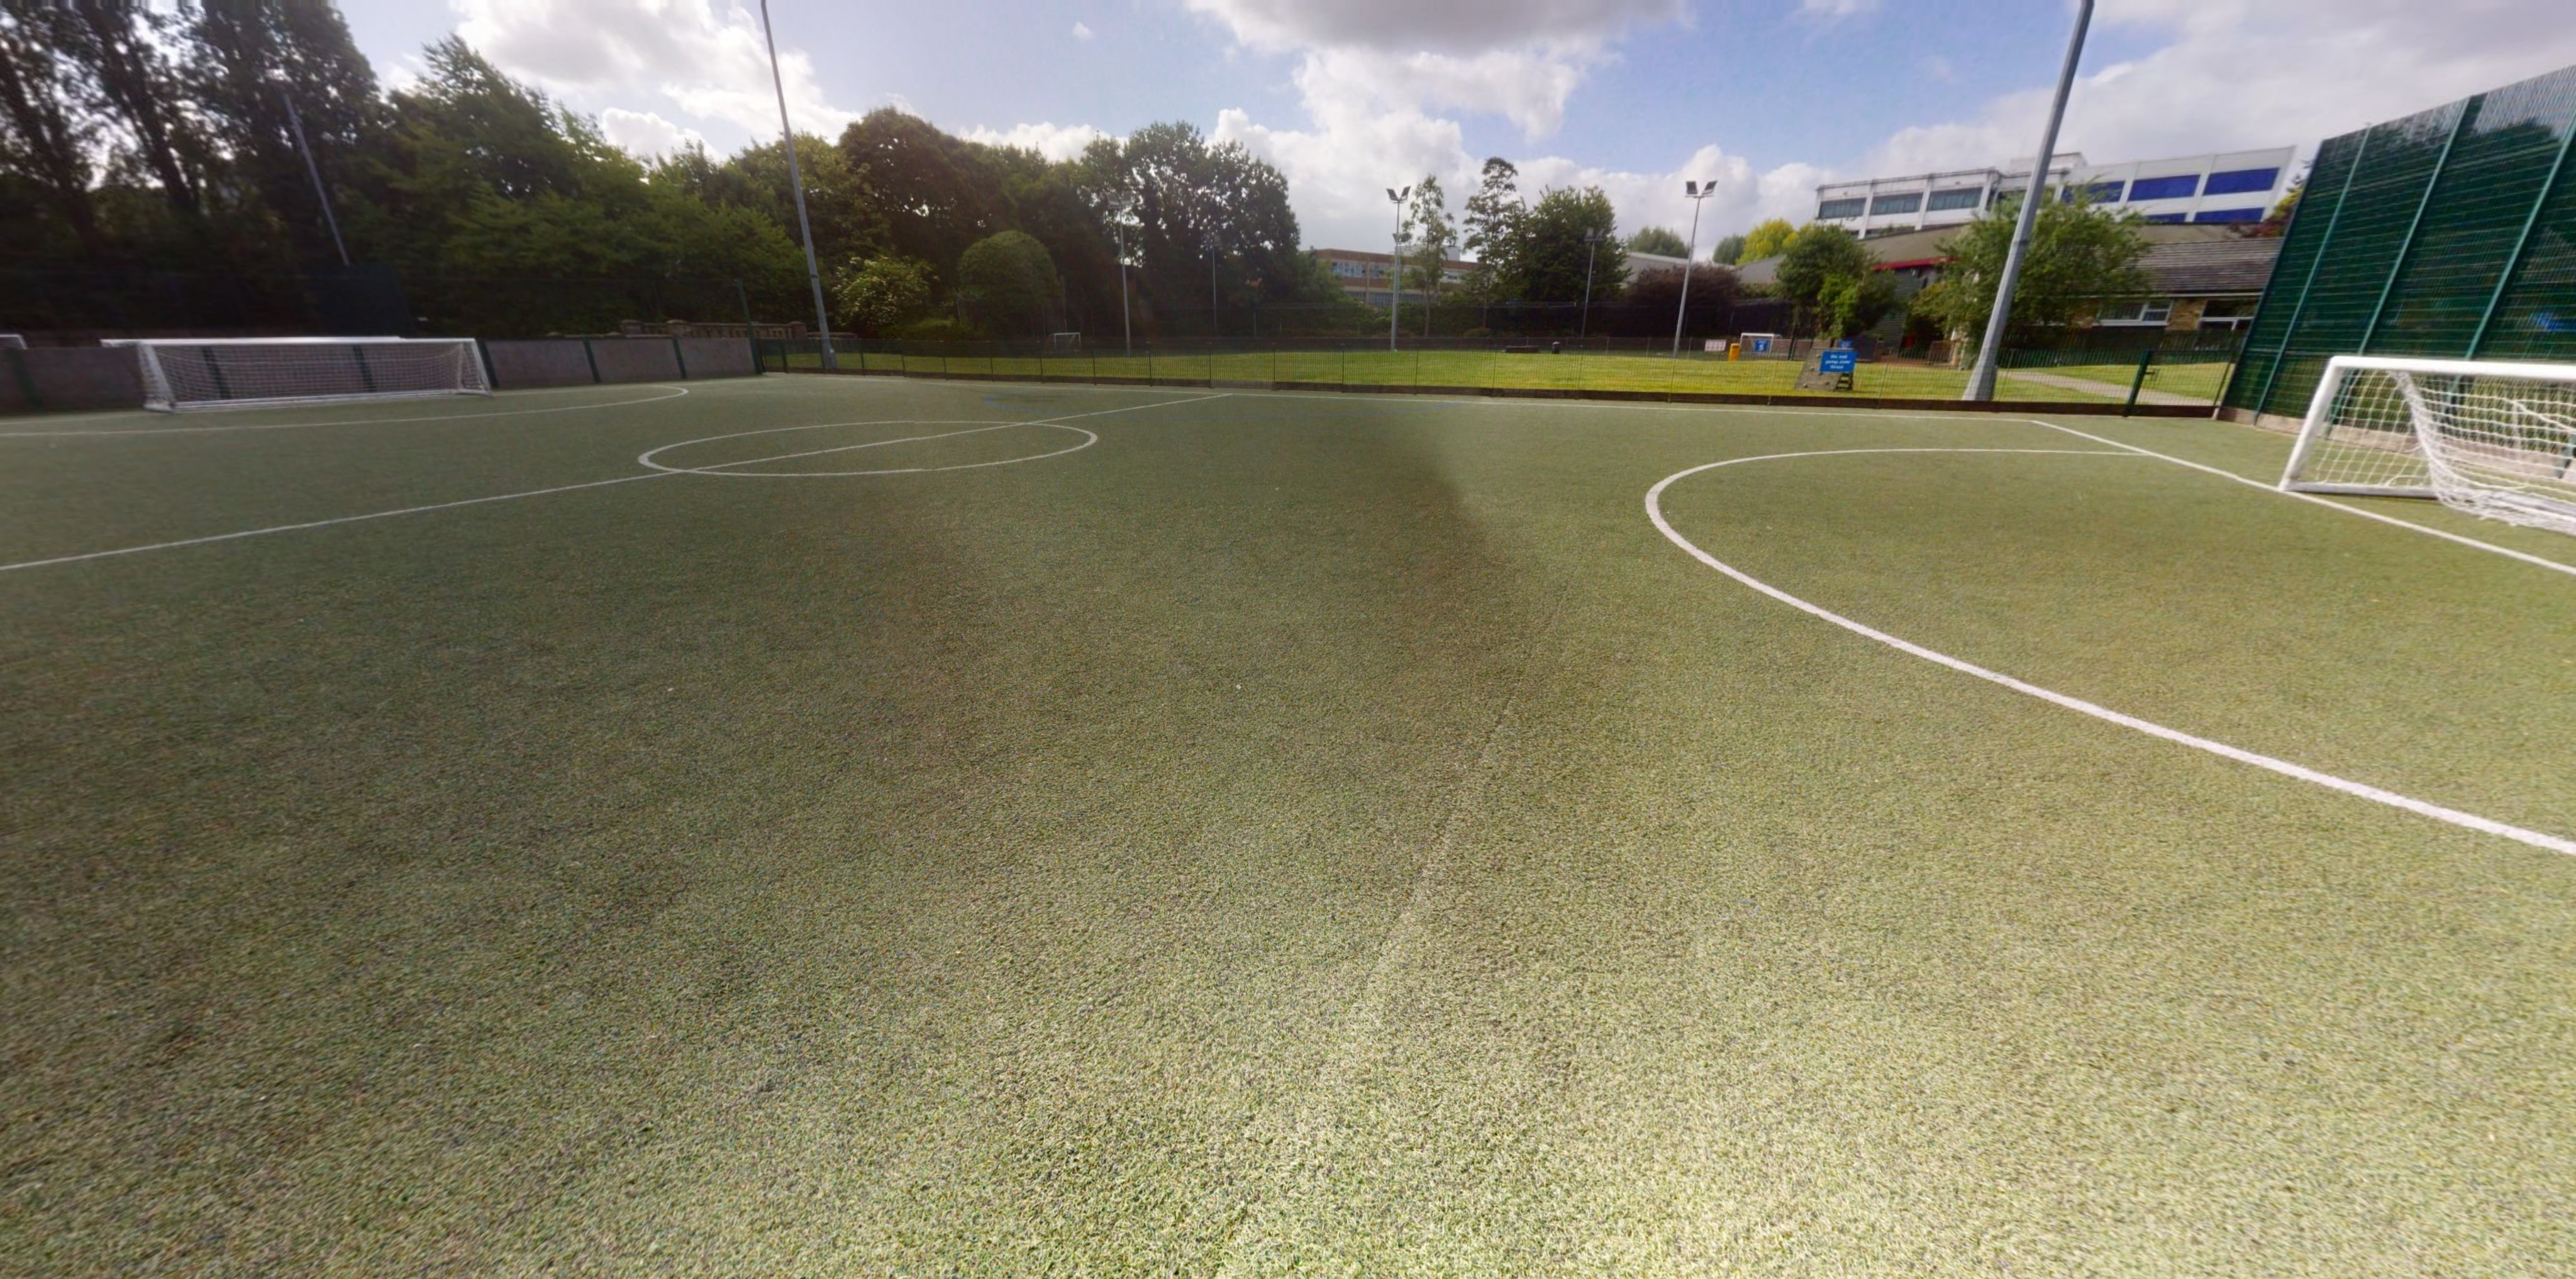 Football pitch at Wandle Recreation Centre Wandle Recreation Centre Wandsworth 020 8871 1149